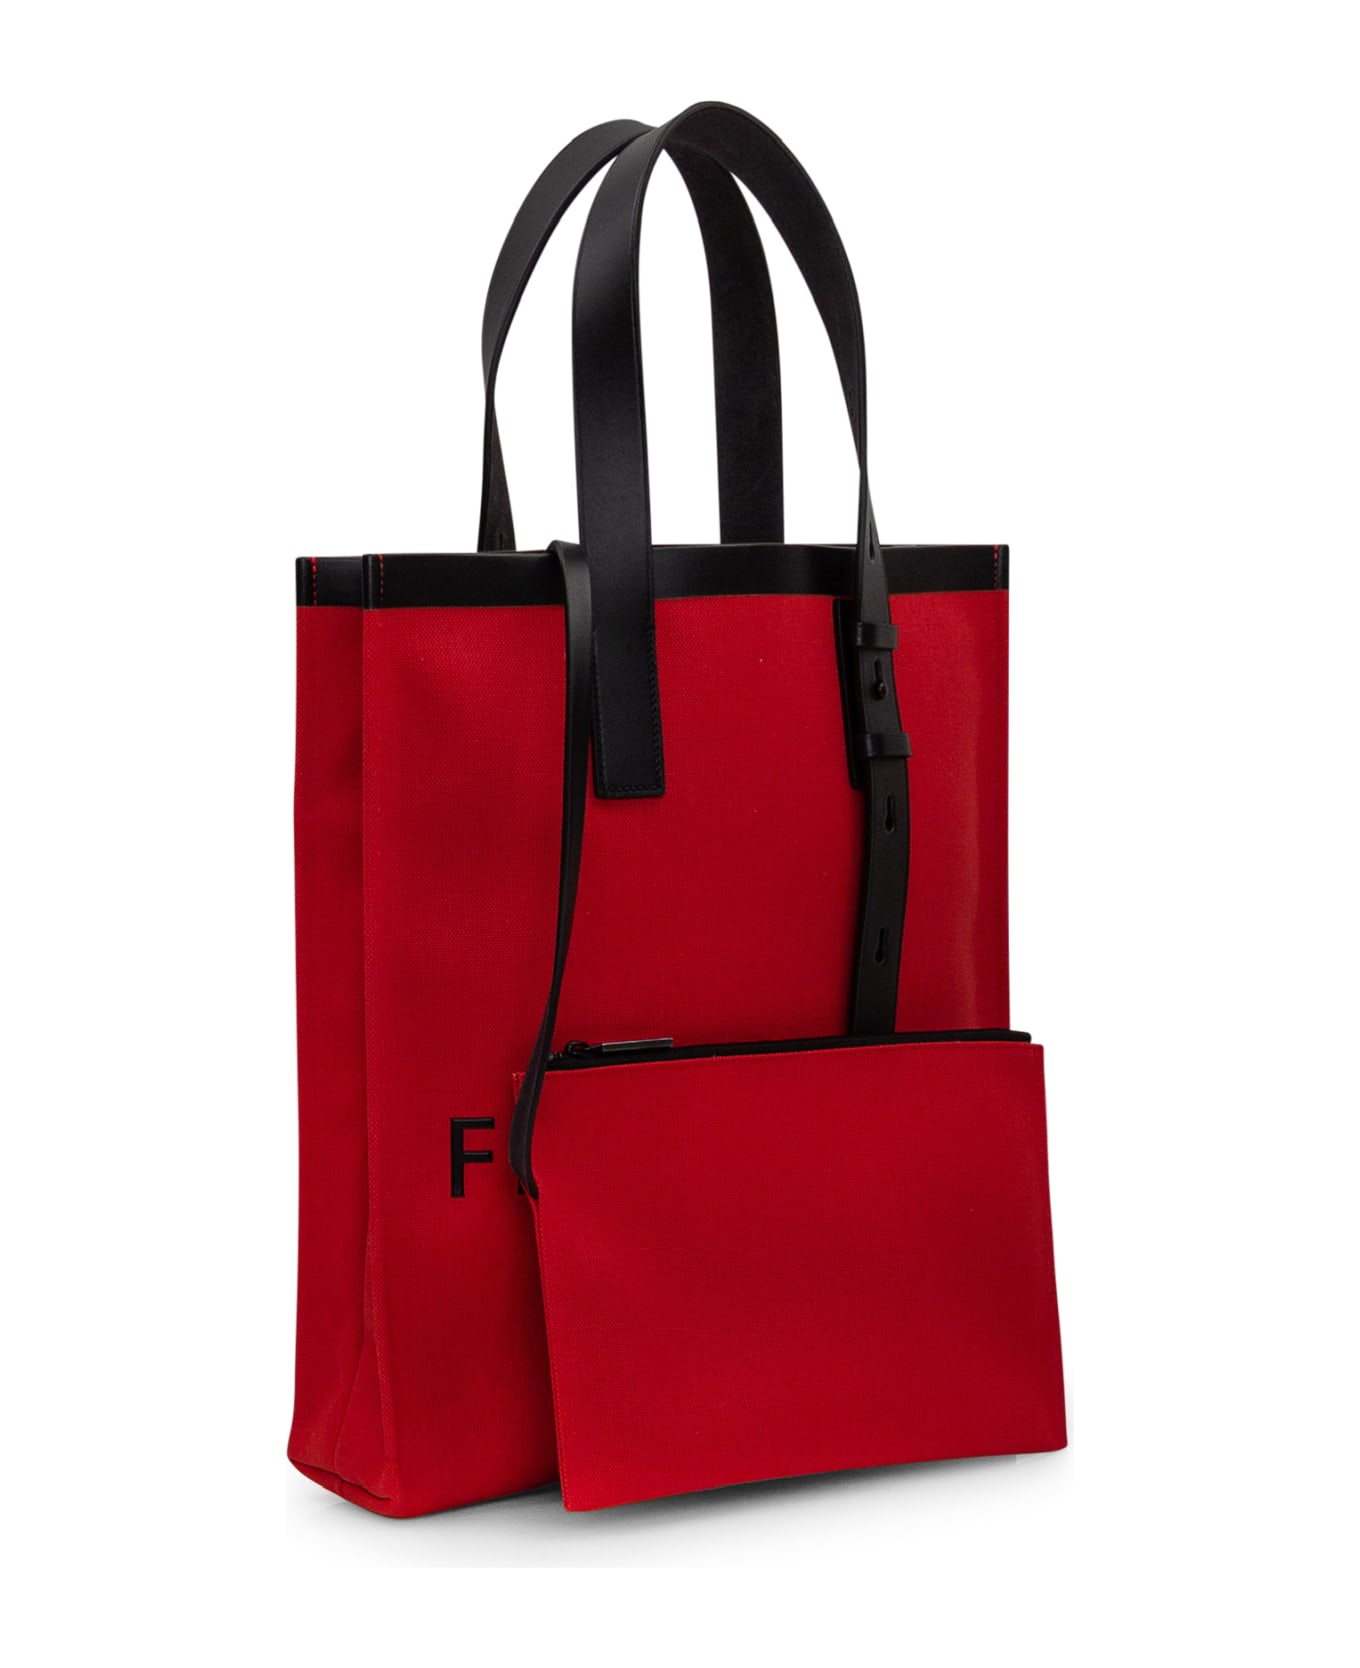 Ferragamo Tote Bag With Logo - FLAME RED NERO トートバッグ